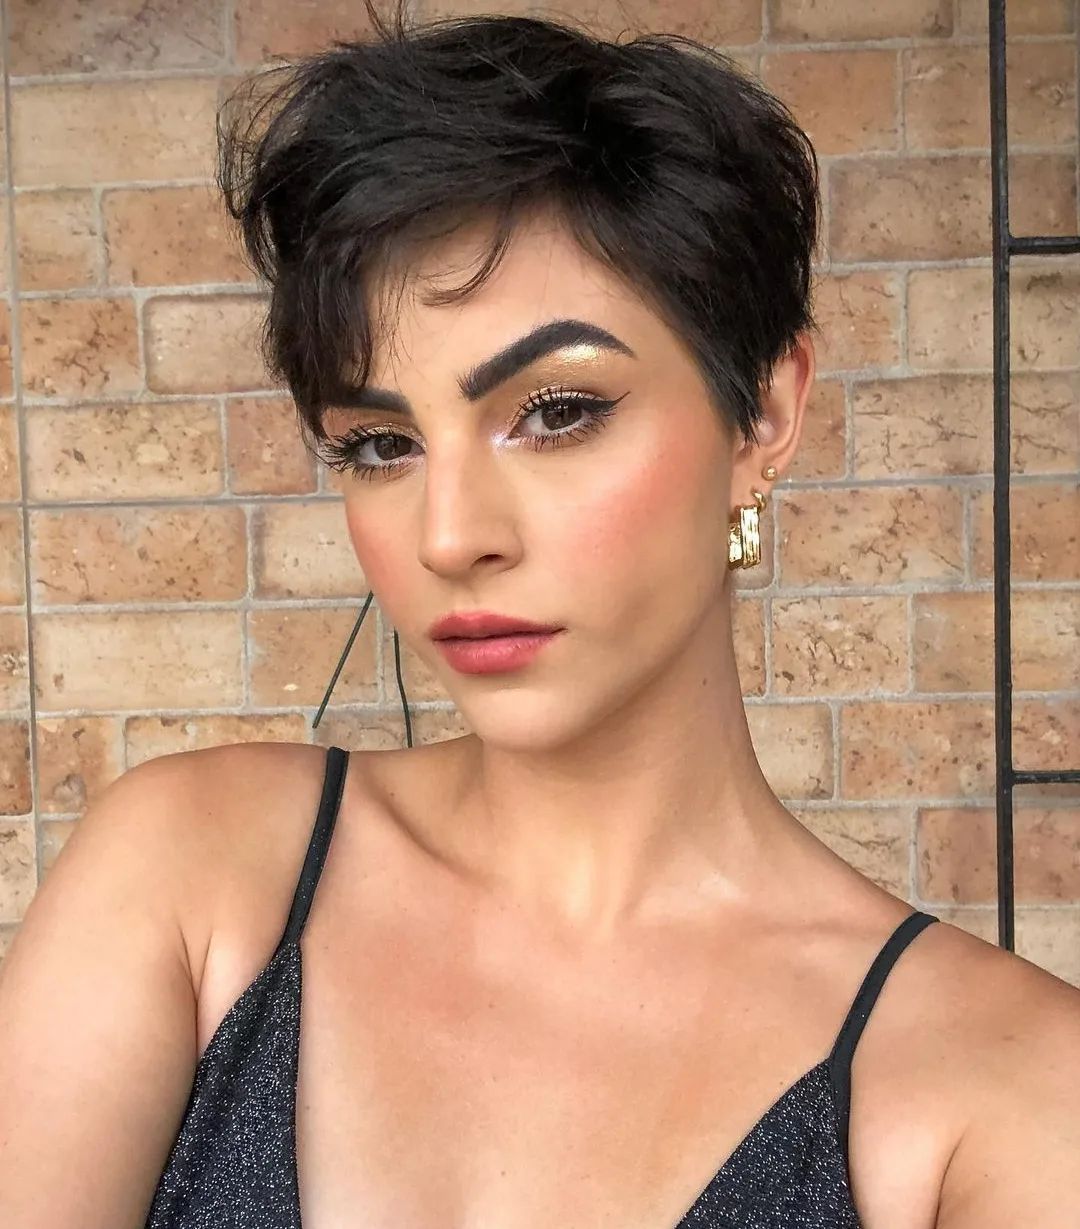 Trendy short haircuts for spring 2023: ideas to help you freshen up your look